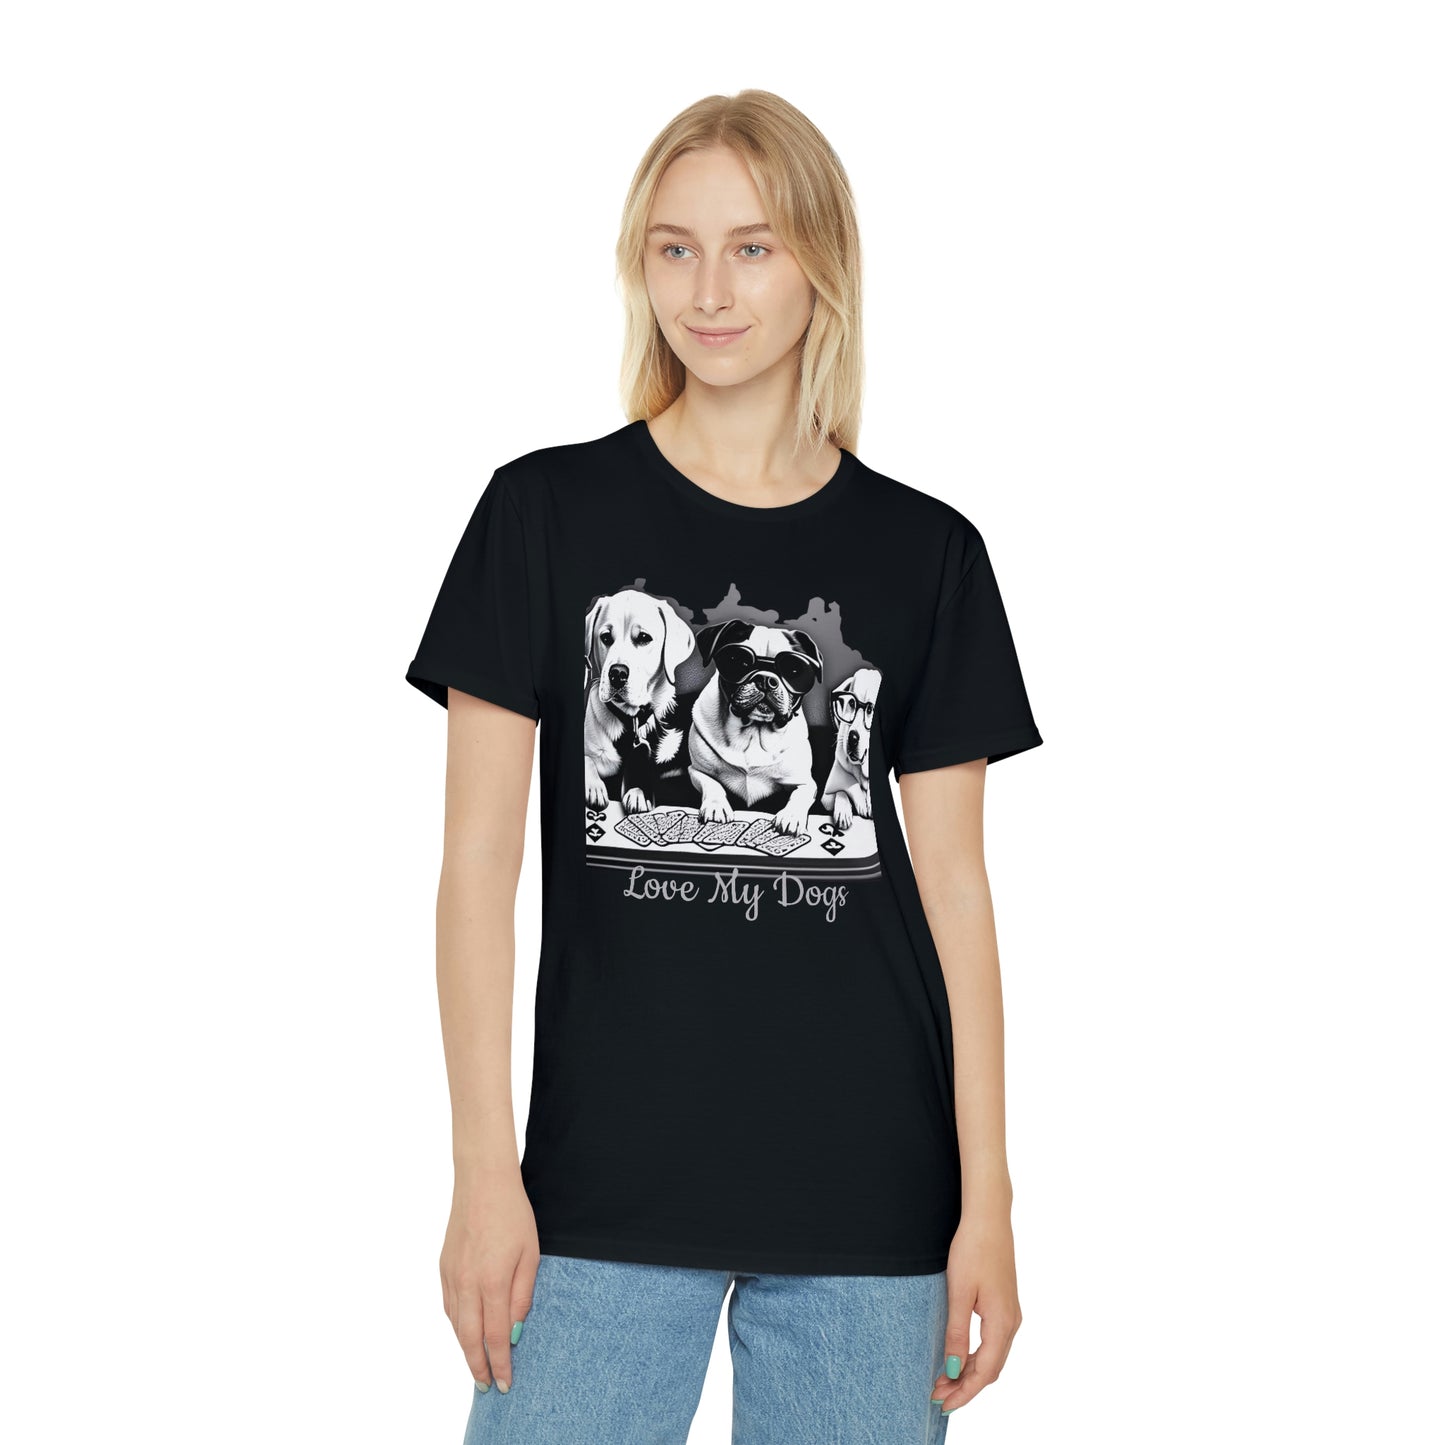 Love My Dogs T-Shirt, My Dogs Playing card around the table T-Shirt, Great fun Gift